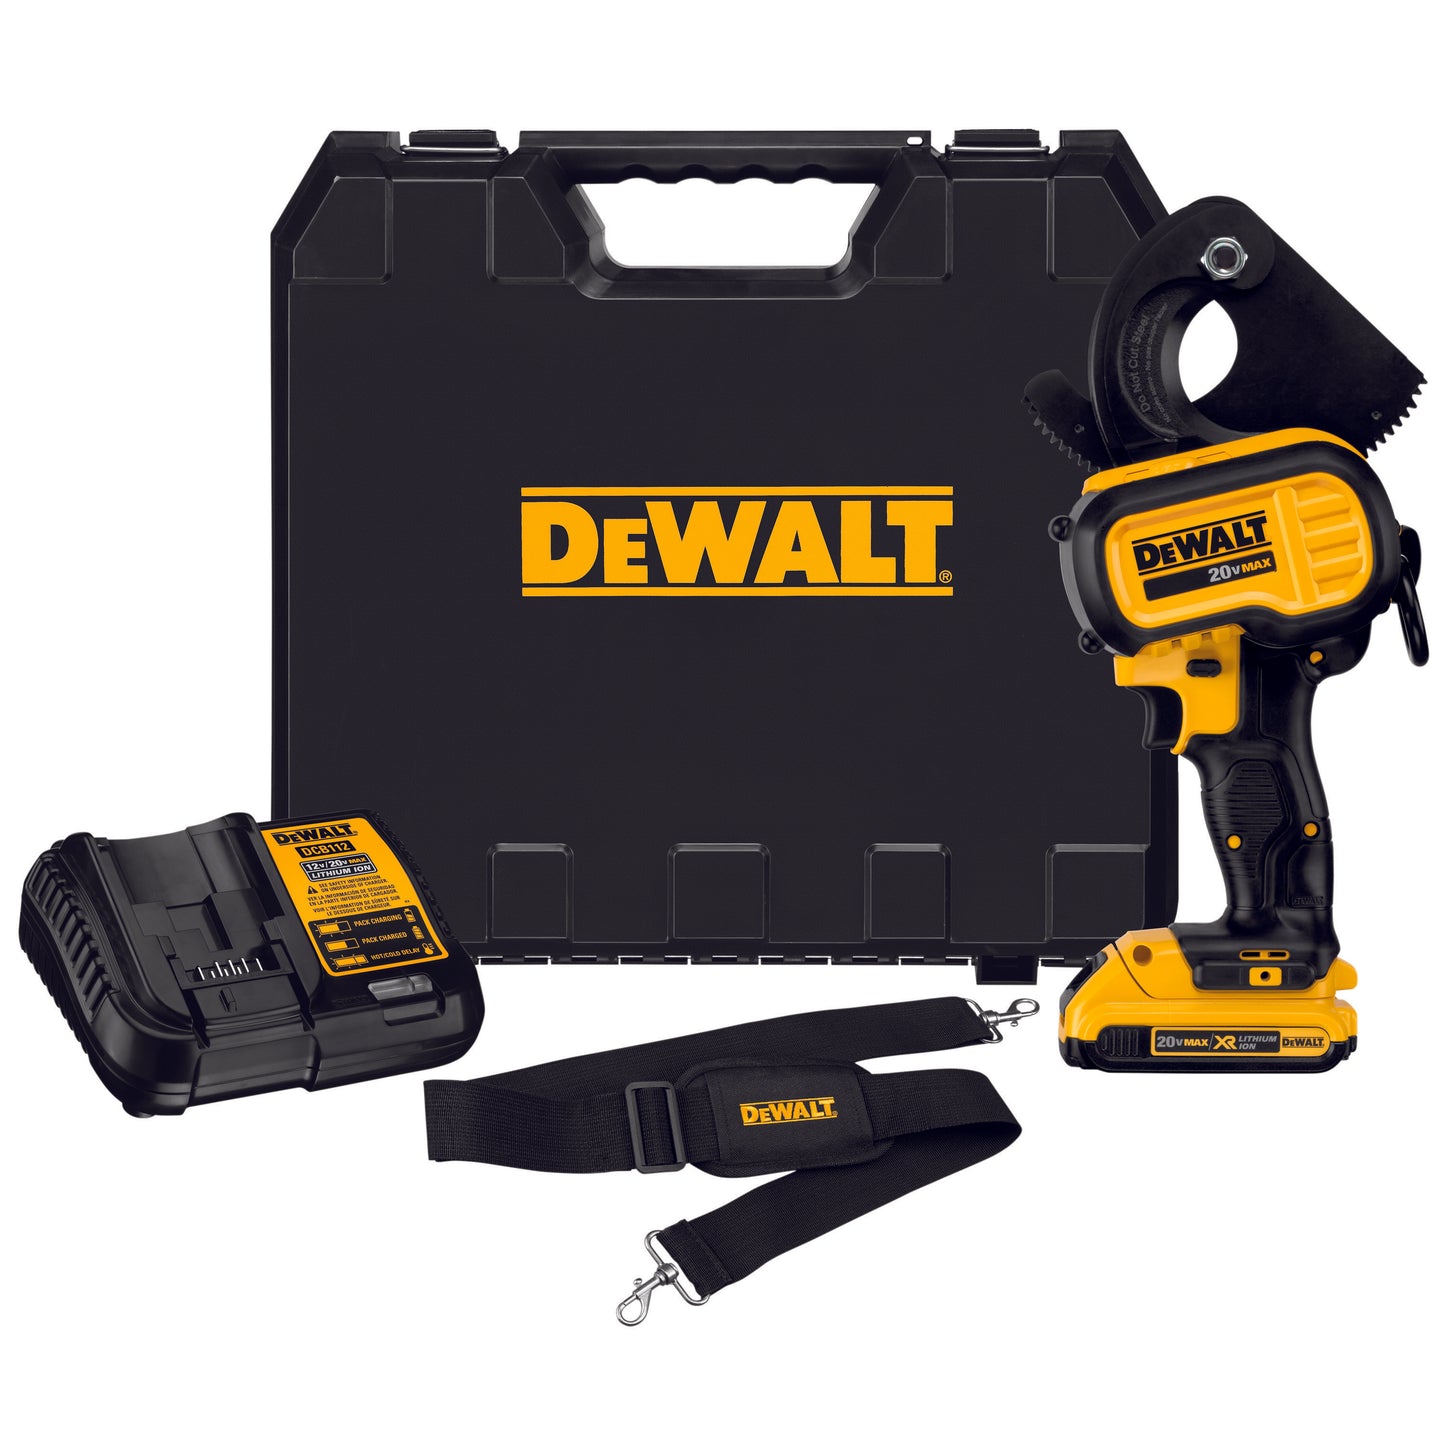 DeWALT® DCE150D1 Cordless Cable Cutting Tool Kit, 750 kcmil Copper/1000 kcmil Aluminum Cutting, 20 VDC, Lithium-Ion Battery